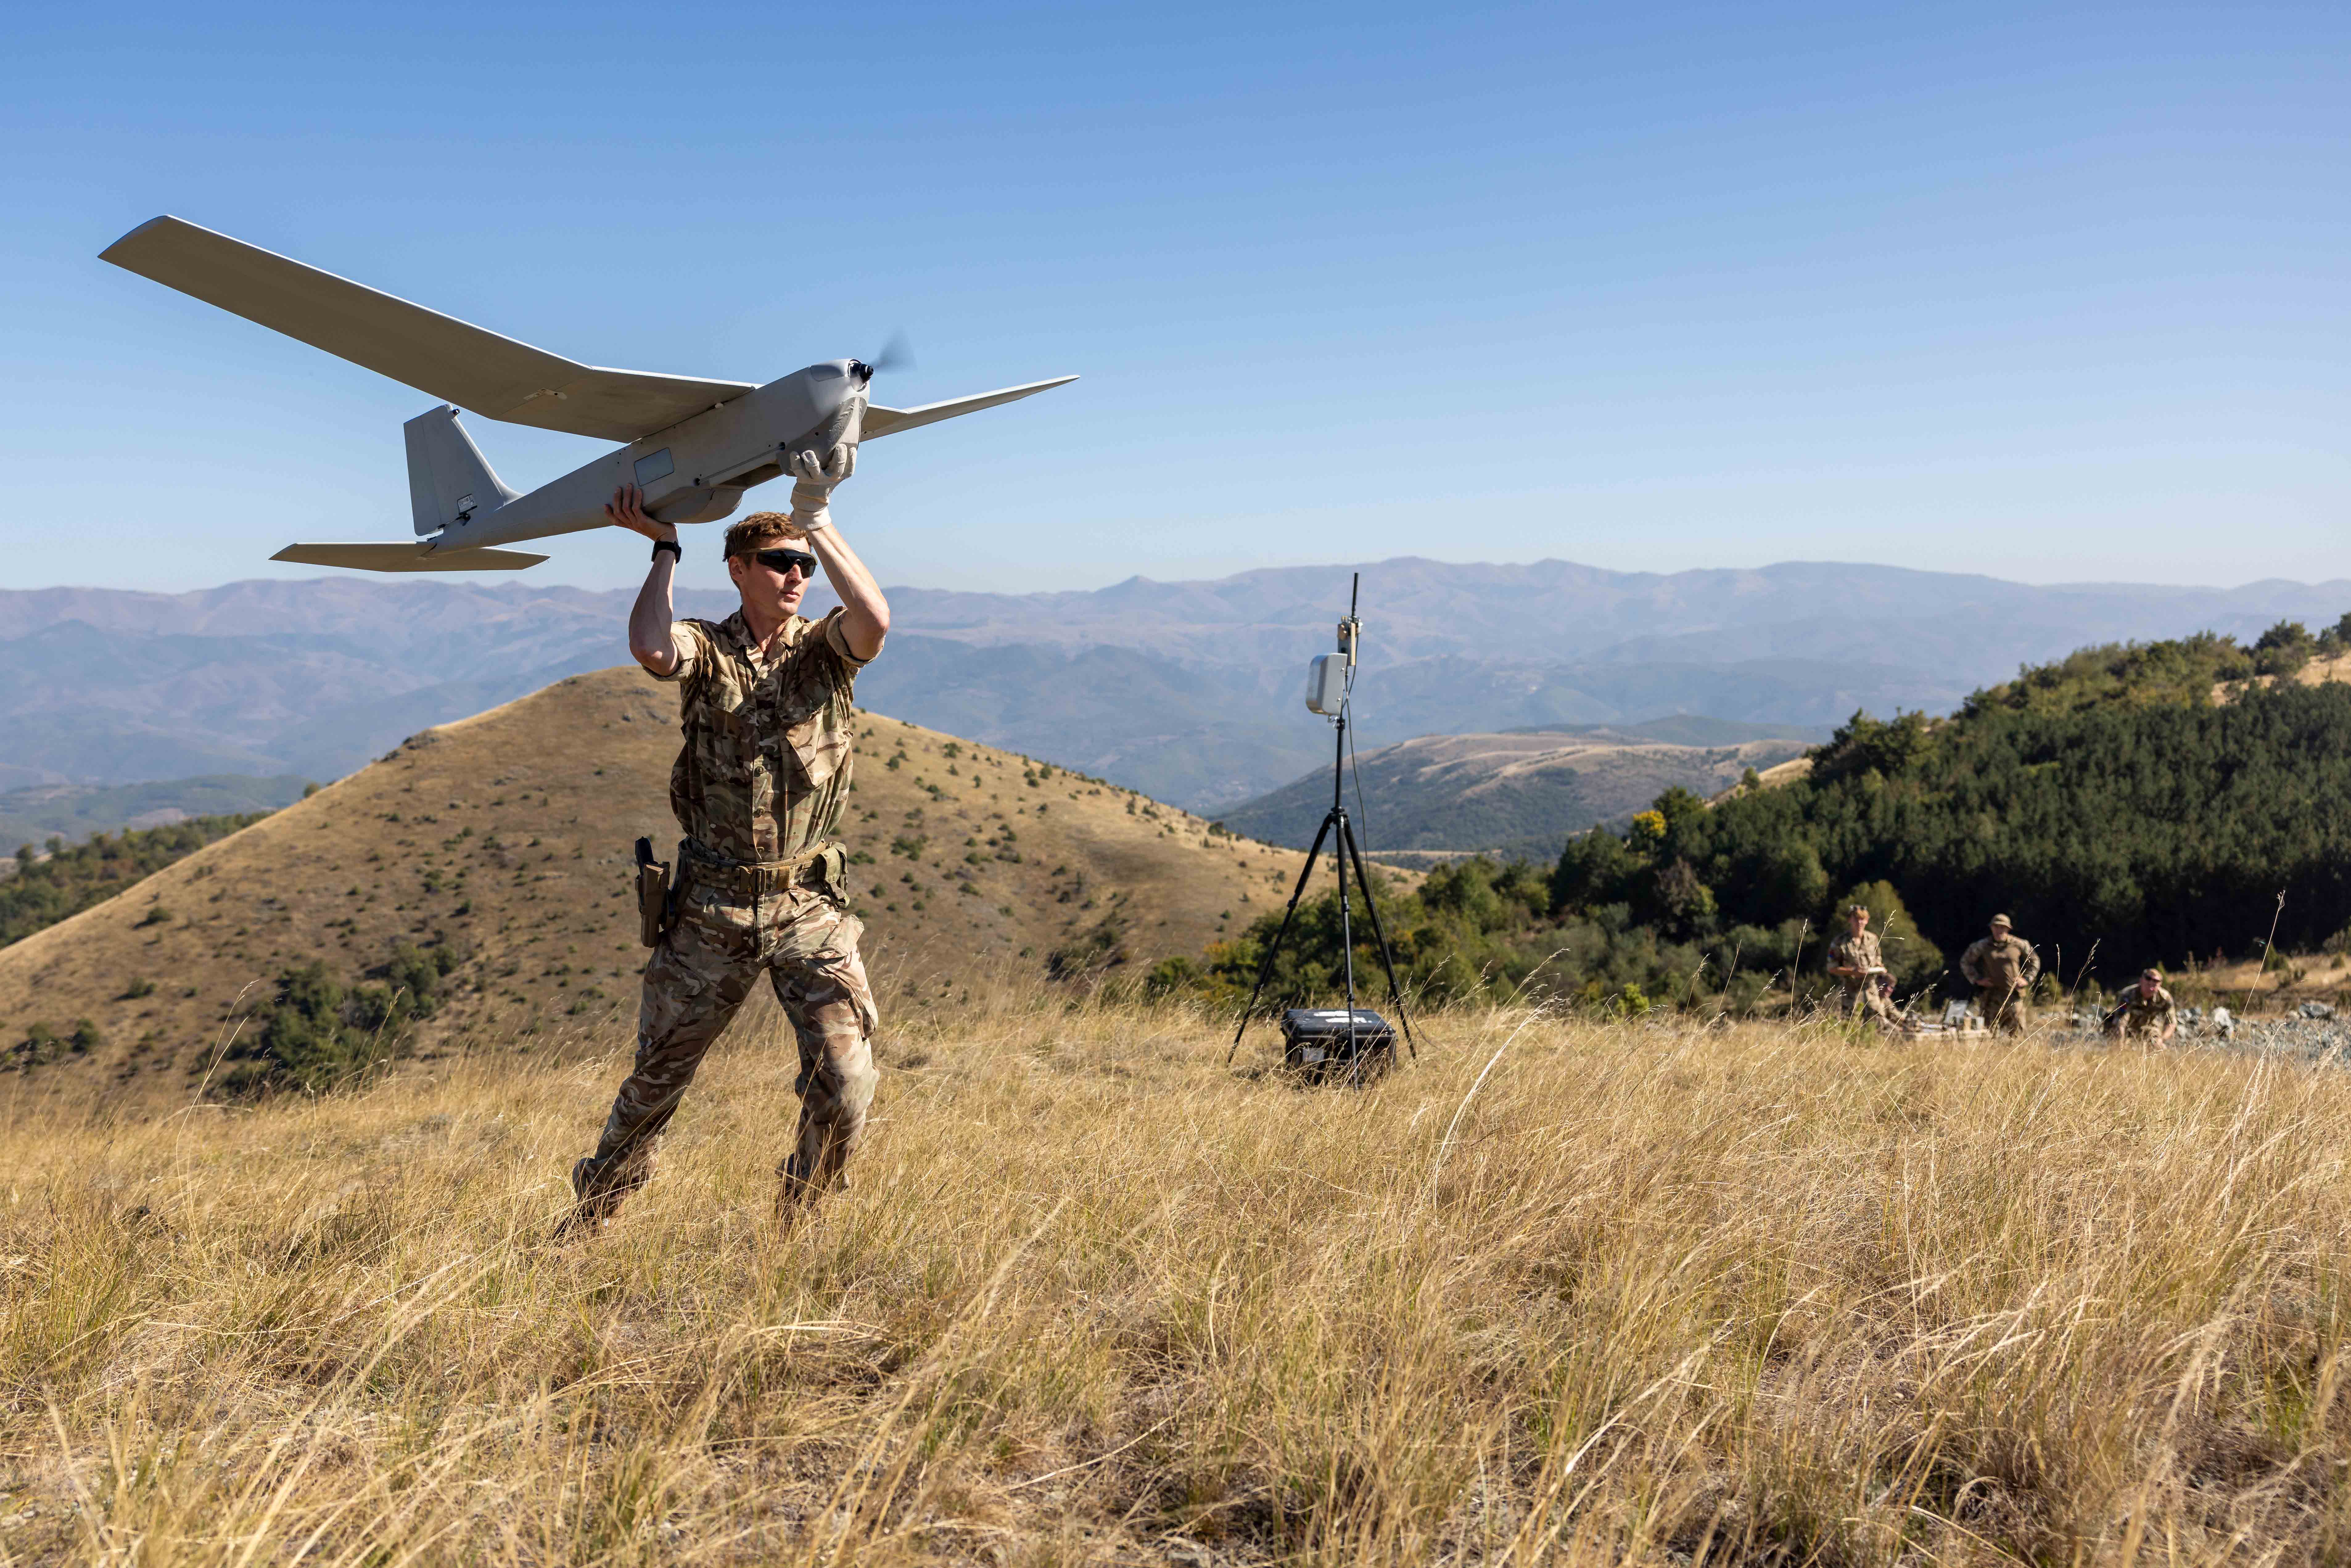 Lance Bombardier Morrissey is on the top of a hill wearing his camouflaged Army uniform and cap. He has both hands on an grey unmanned aerial system, which has a wing span of around 10 feet he is about to launch.